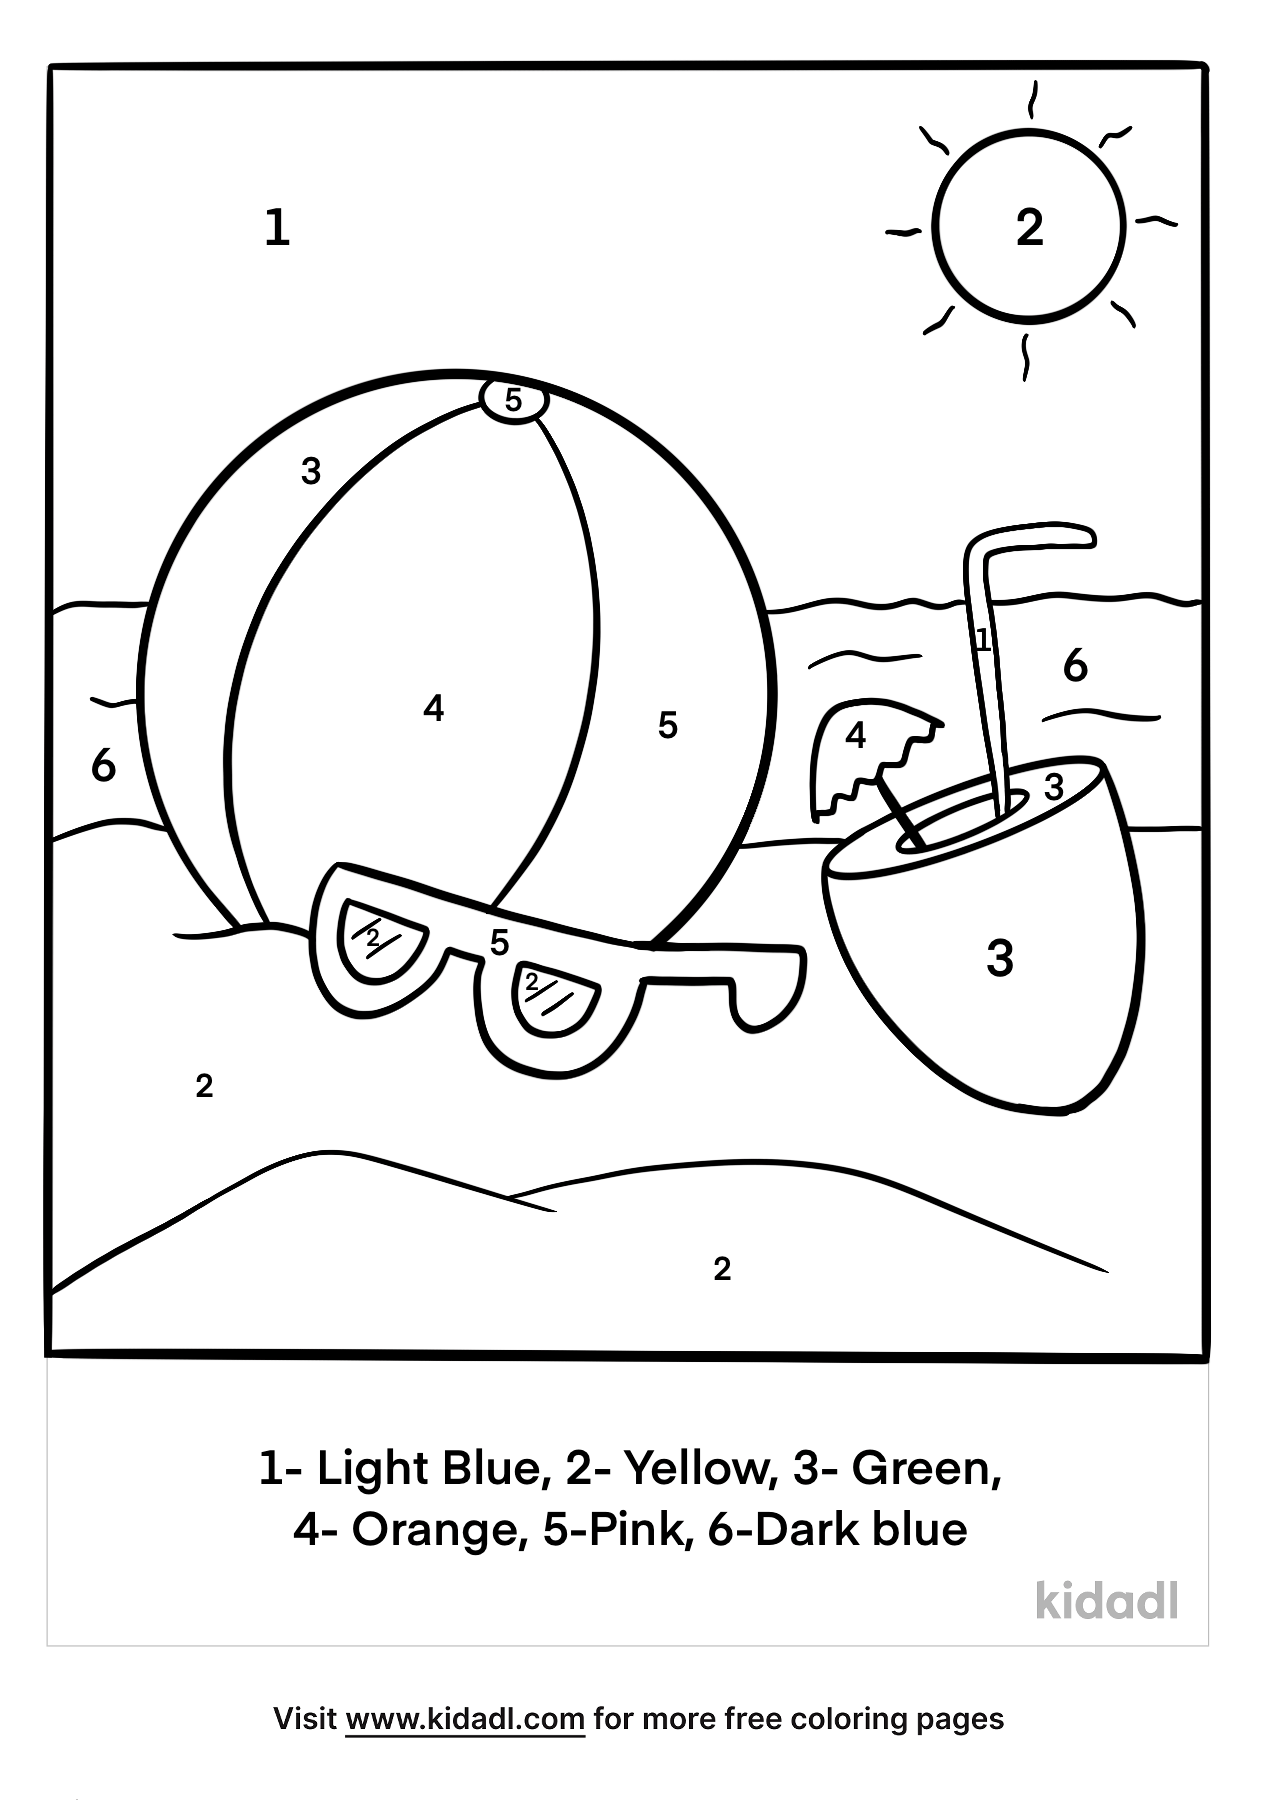 Summer Color By Numbers Coloring Page. Free Color By Number Coloring